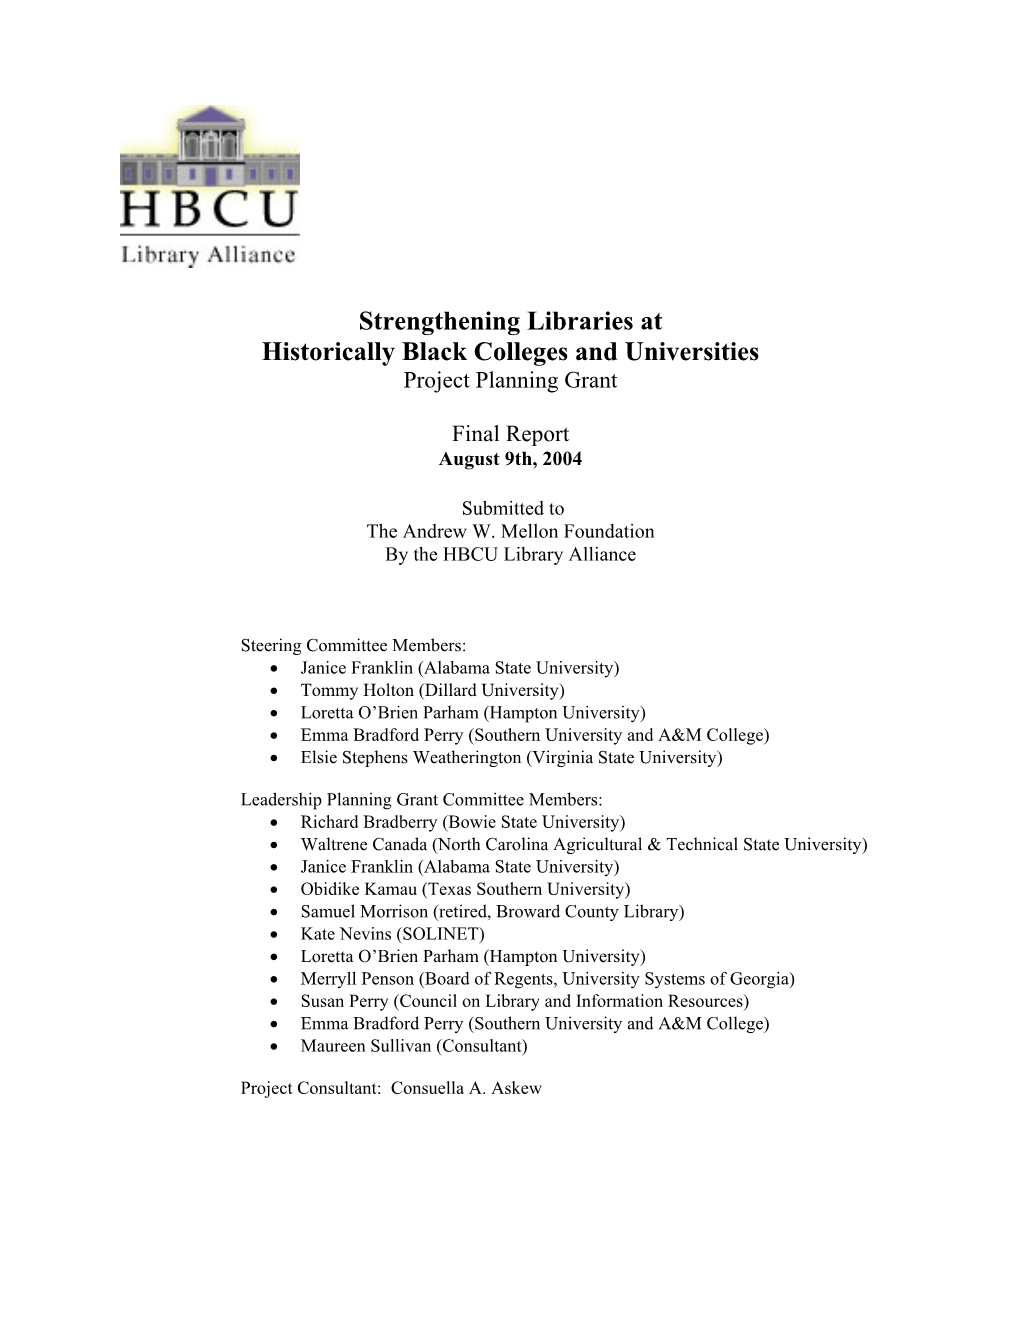 Strengthening Libraries at Historically Black Colleges and Universities Project Planning Grant